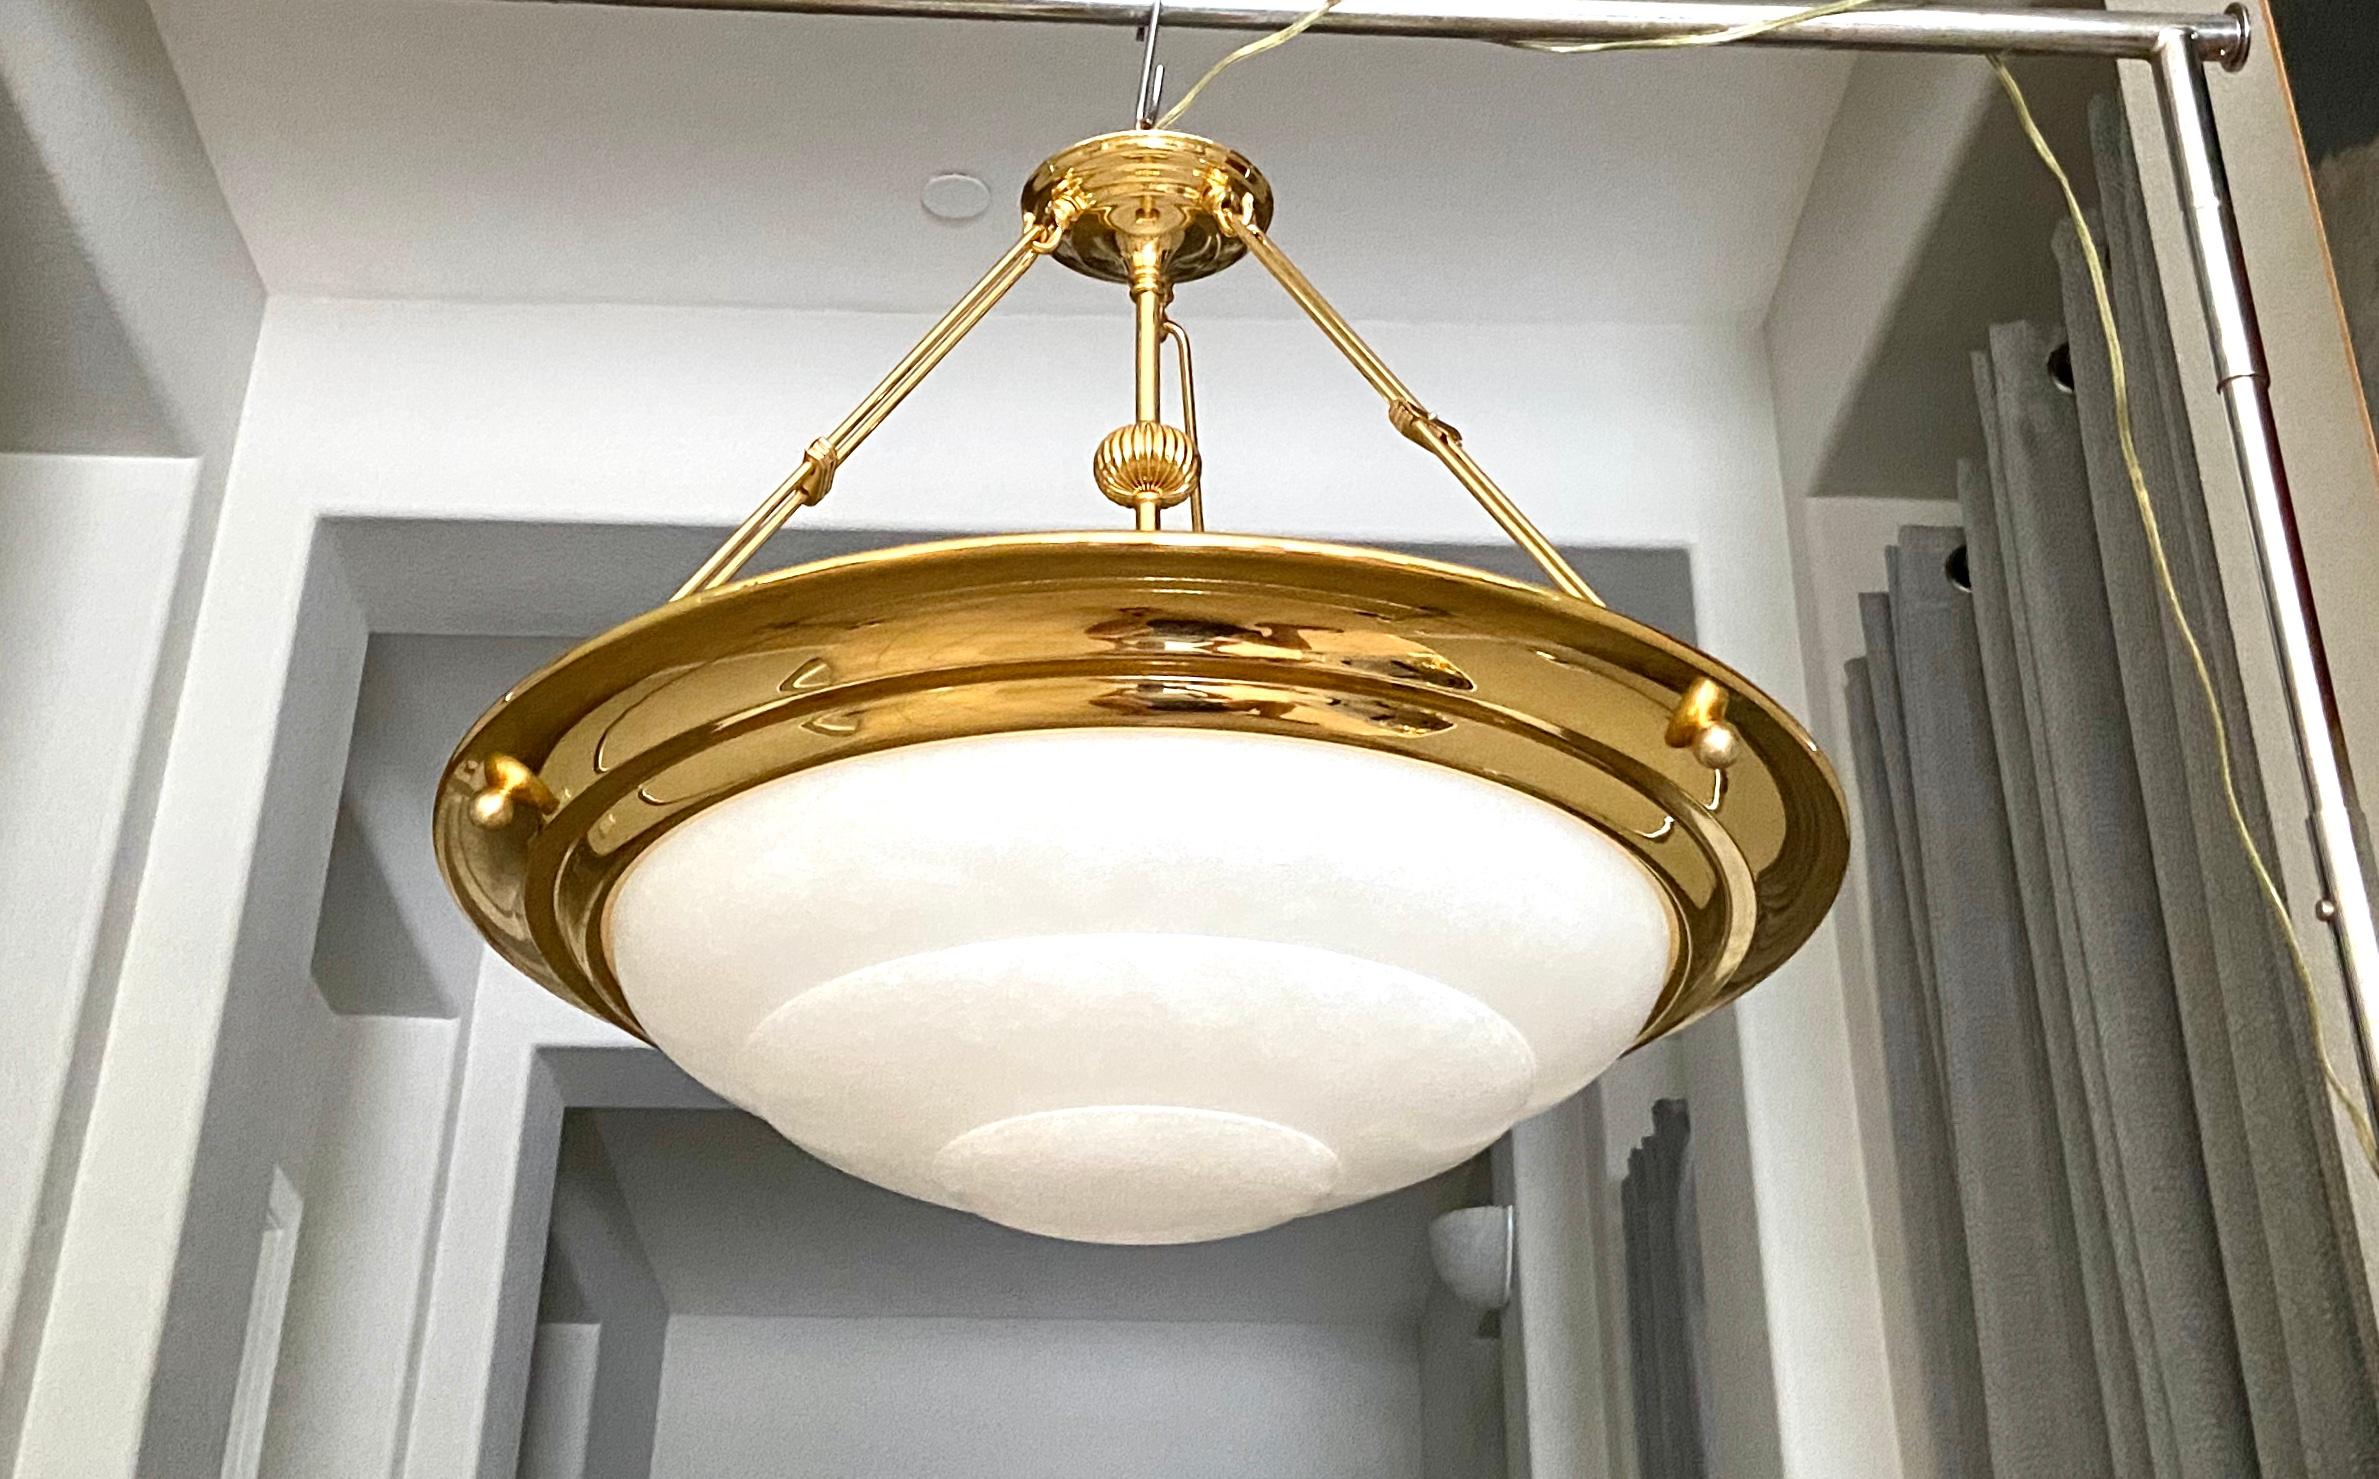 Sleek larger scale carved alabaster chandelier with 3-light and brass finish hardware fittings, perfect for both modern and tradition taste. The polished brass plating is designed with clean lines accented with simple yet elegant detailing, and is